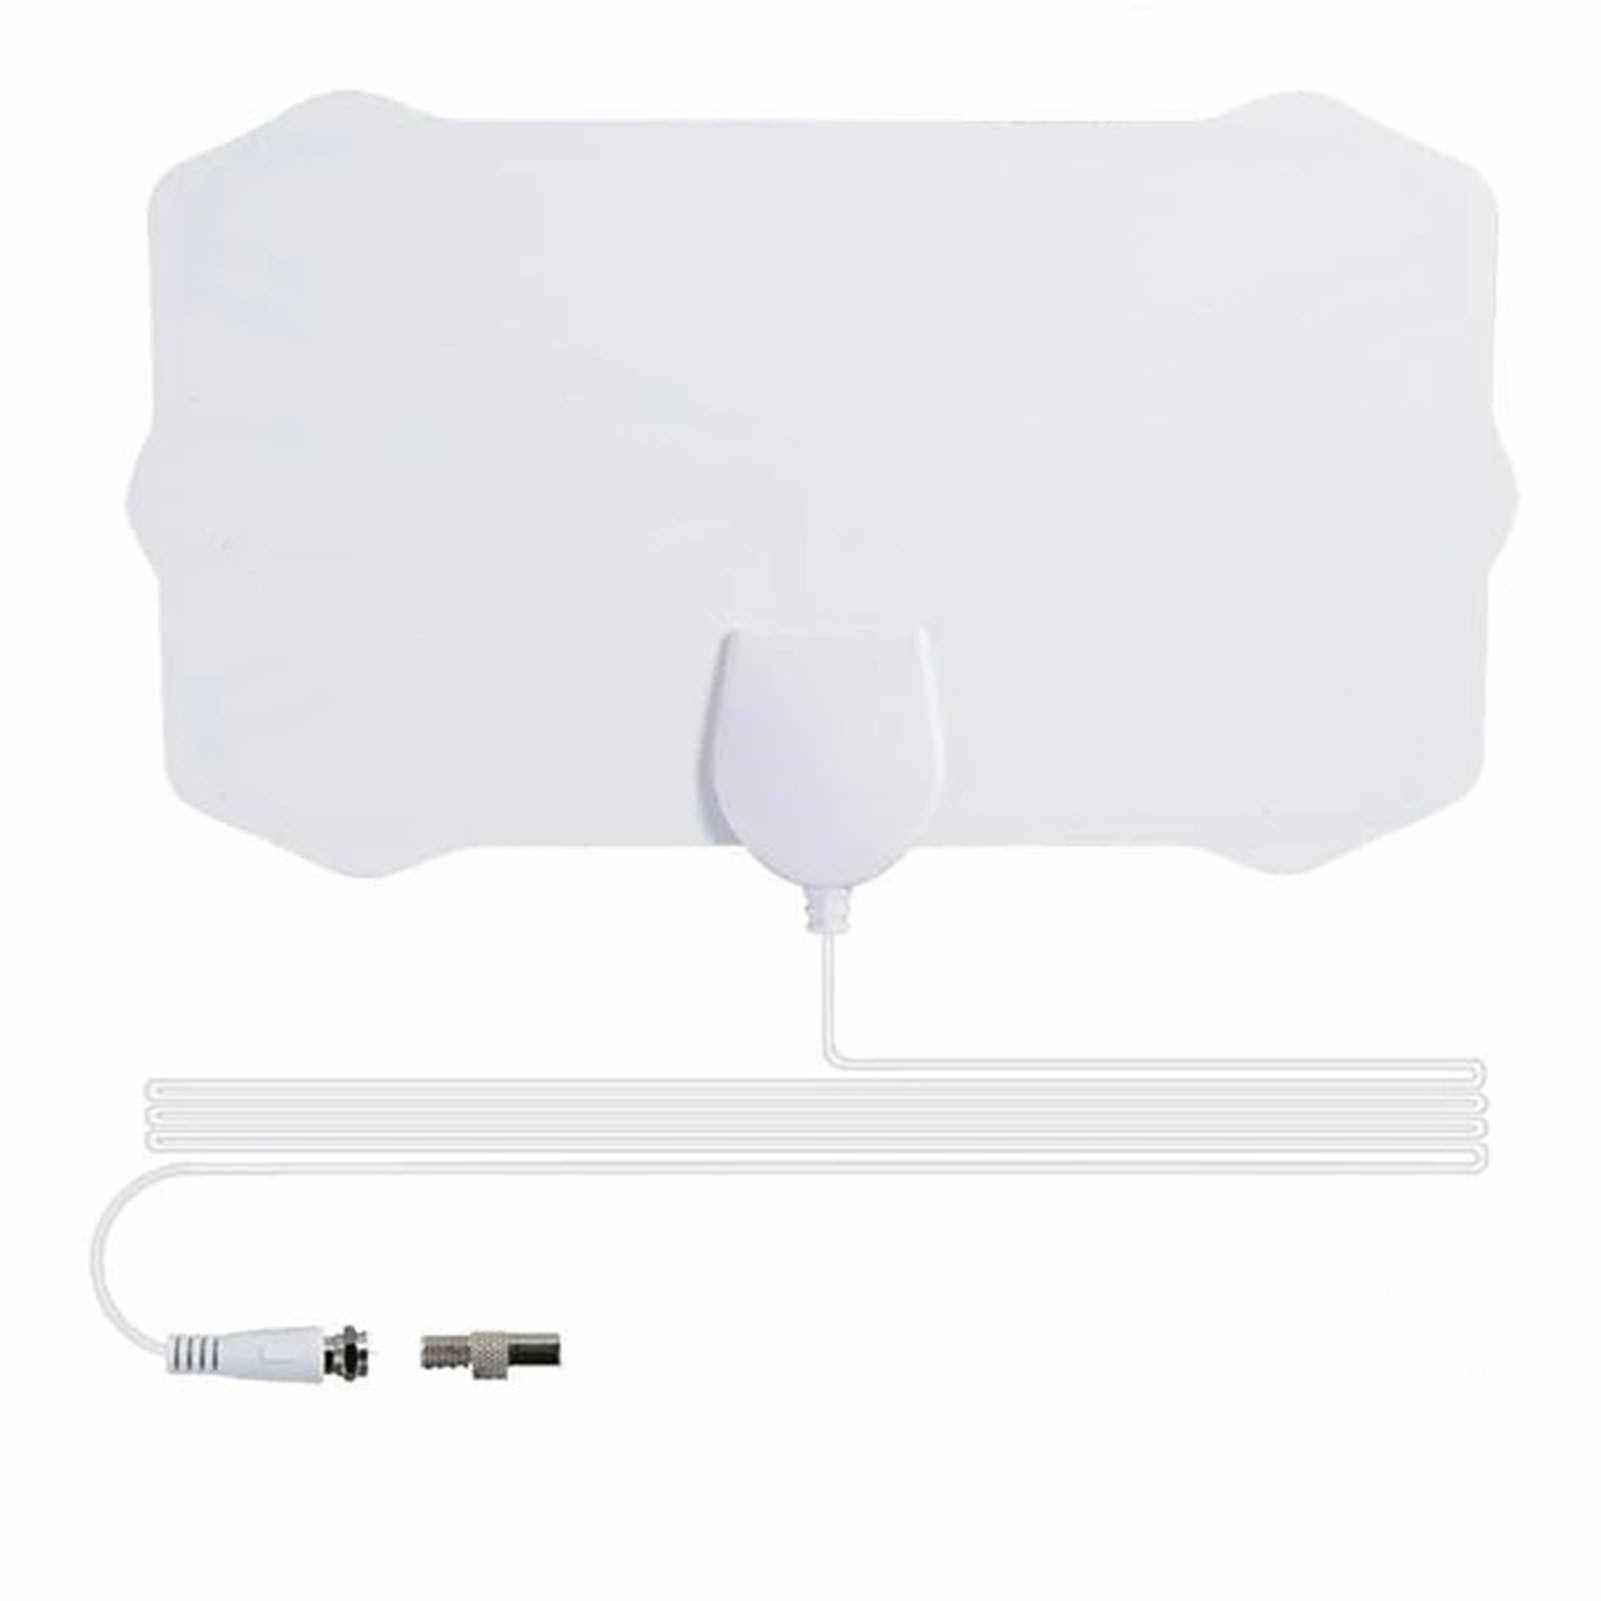 Digital TV Antenna Indoor HDTV Antenna Mini HDTV Signal Receiver with Coax Cable for Free Channels White (White)